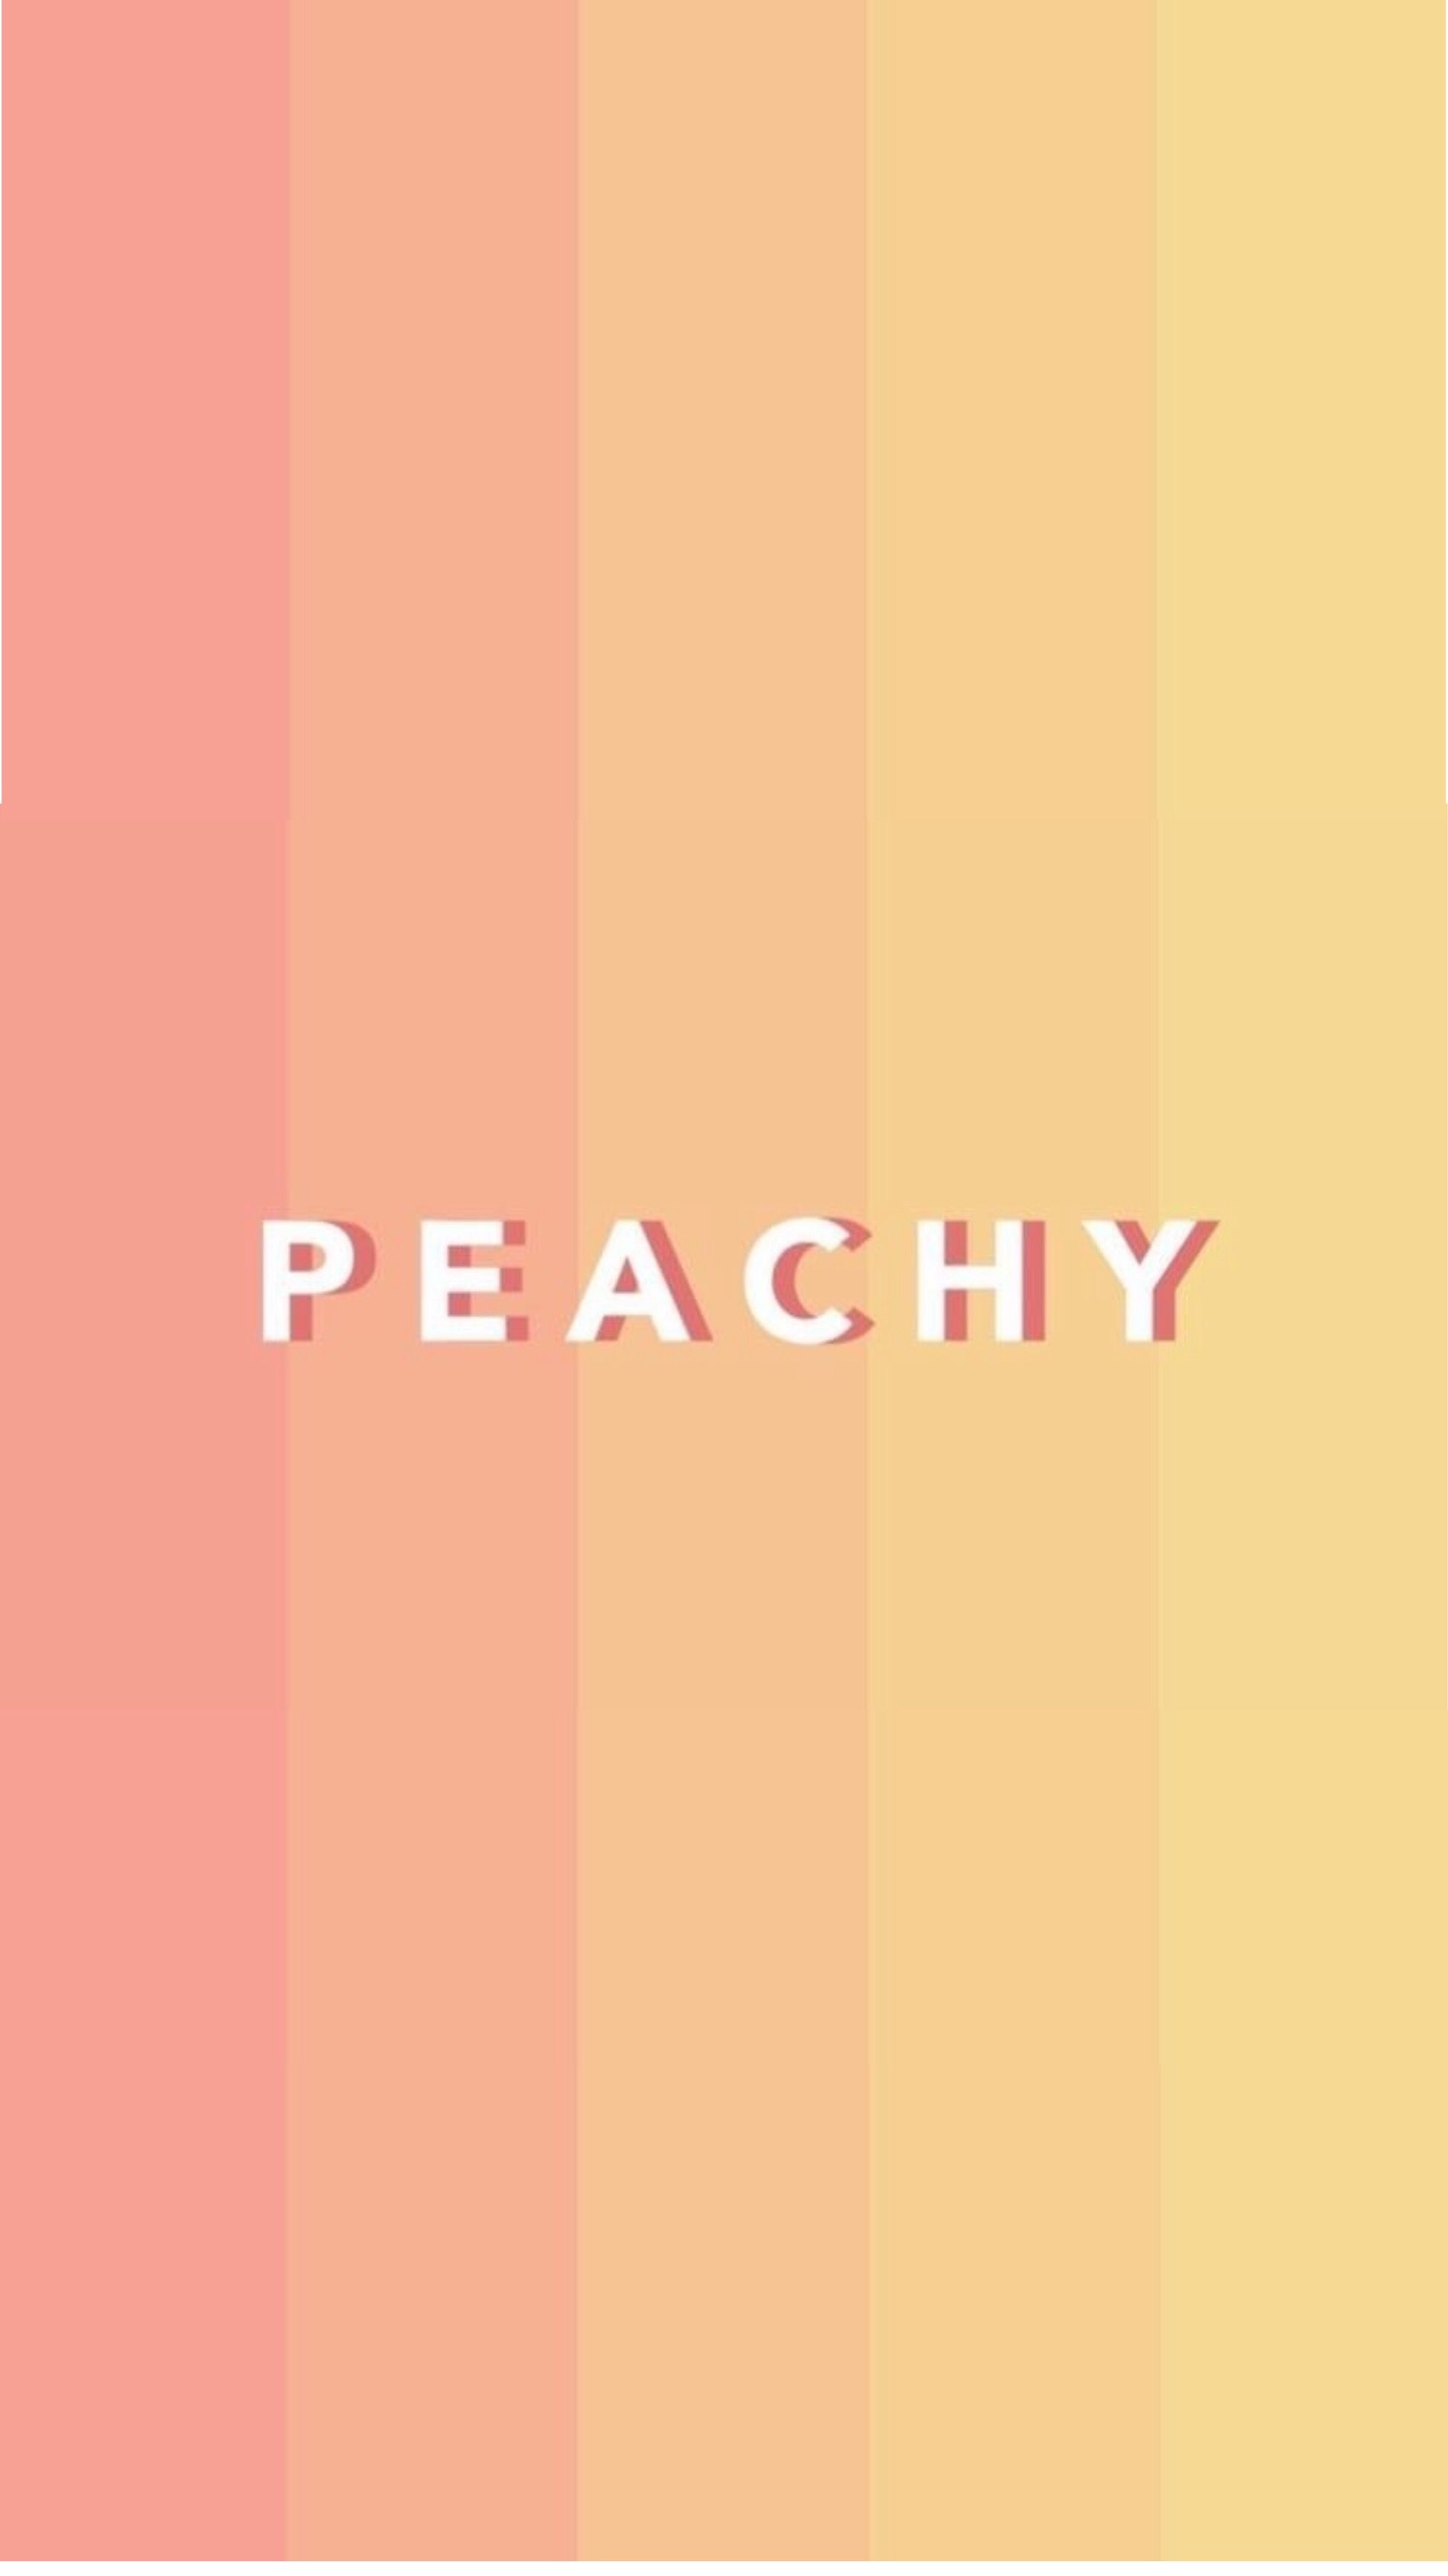 peach aesthetic wallpapers wallpaper cave on peach aesthetic wallpapers